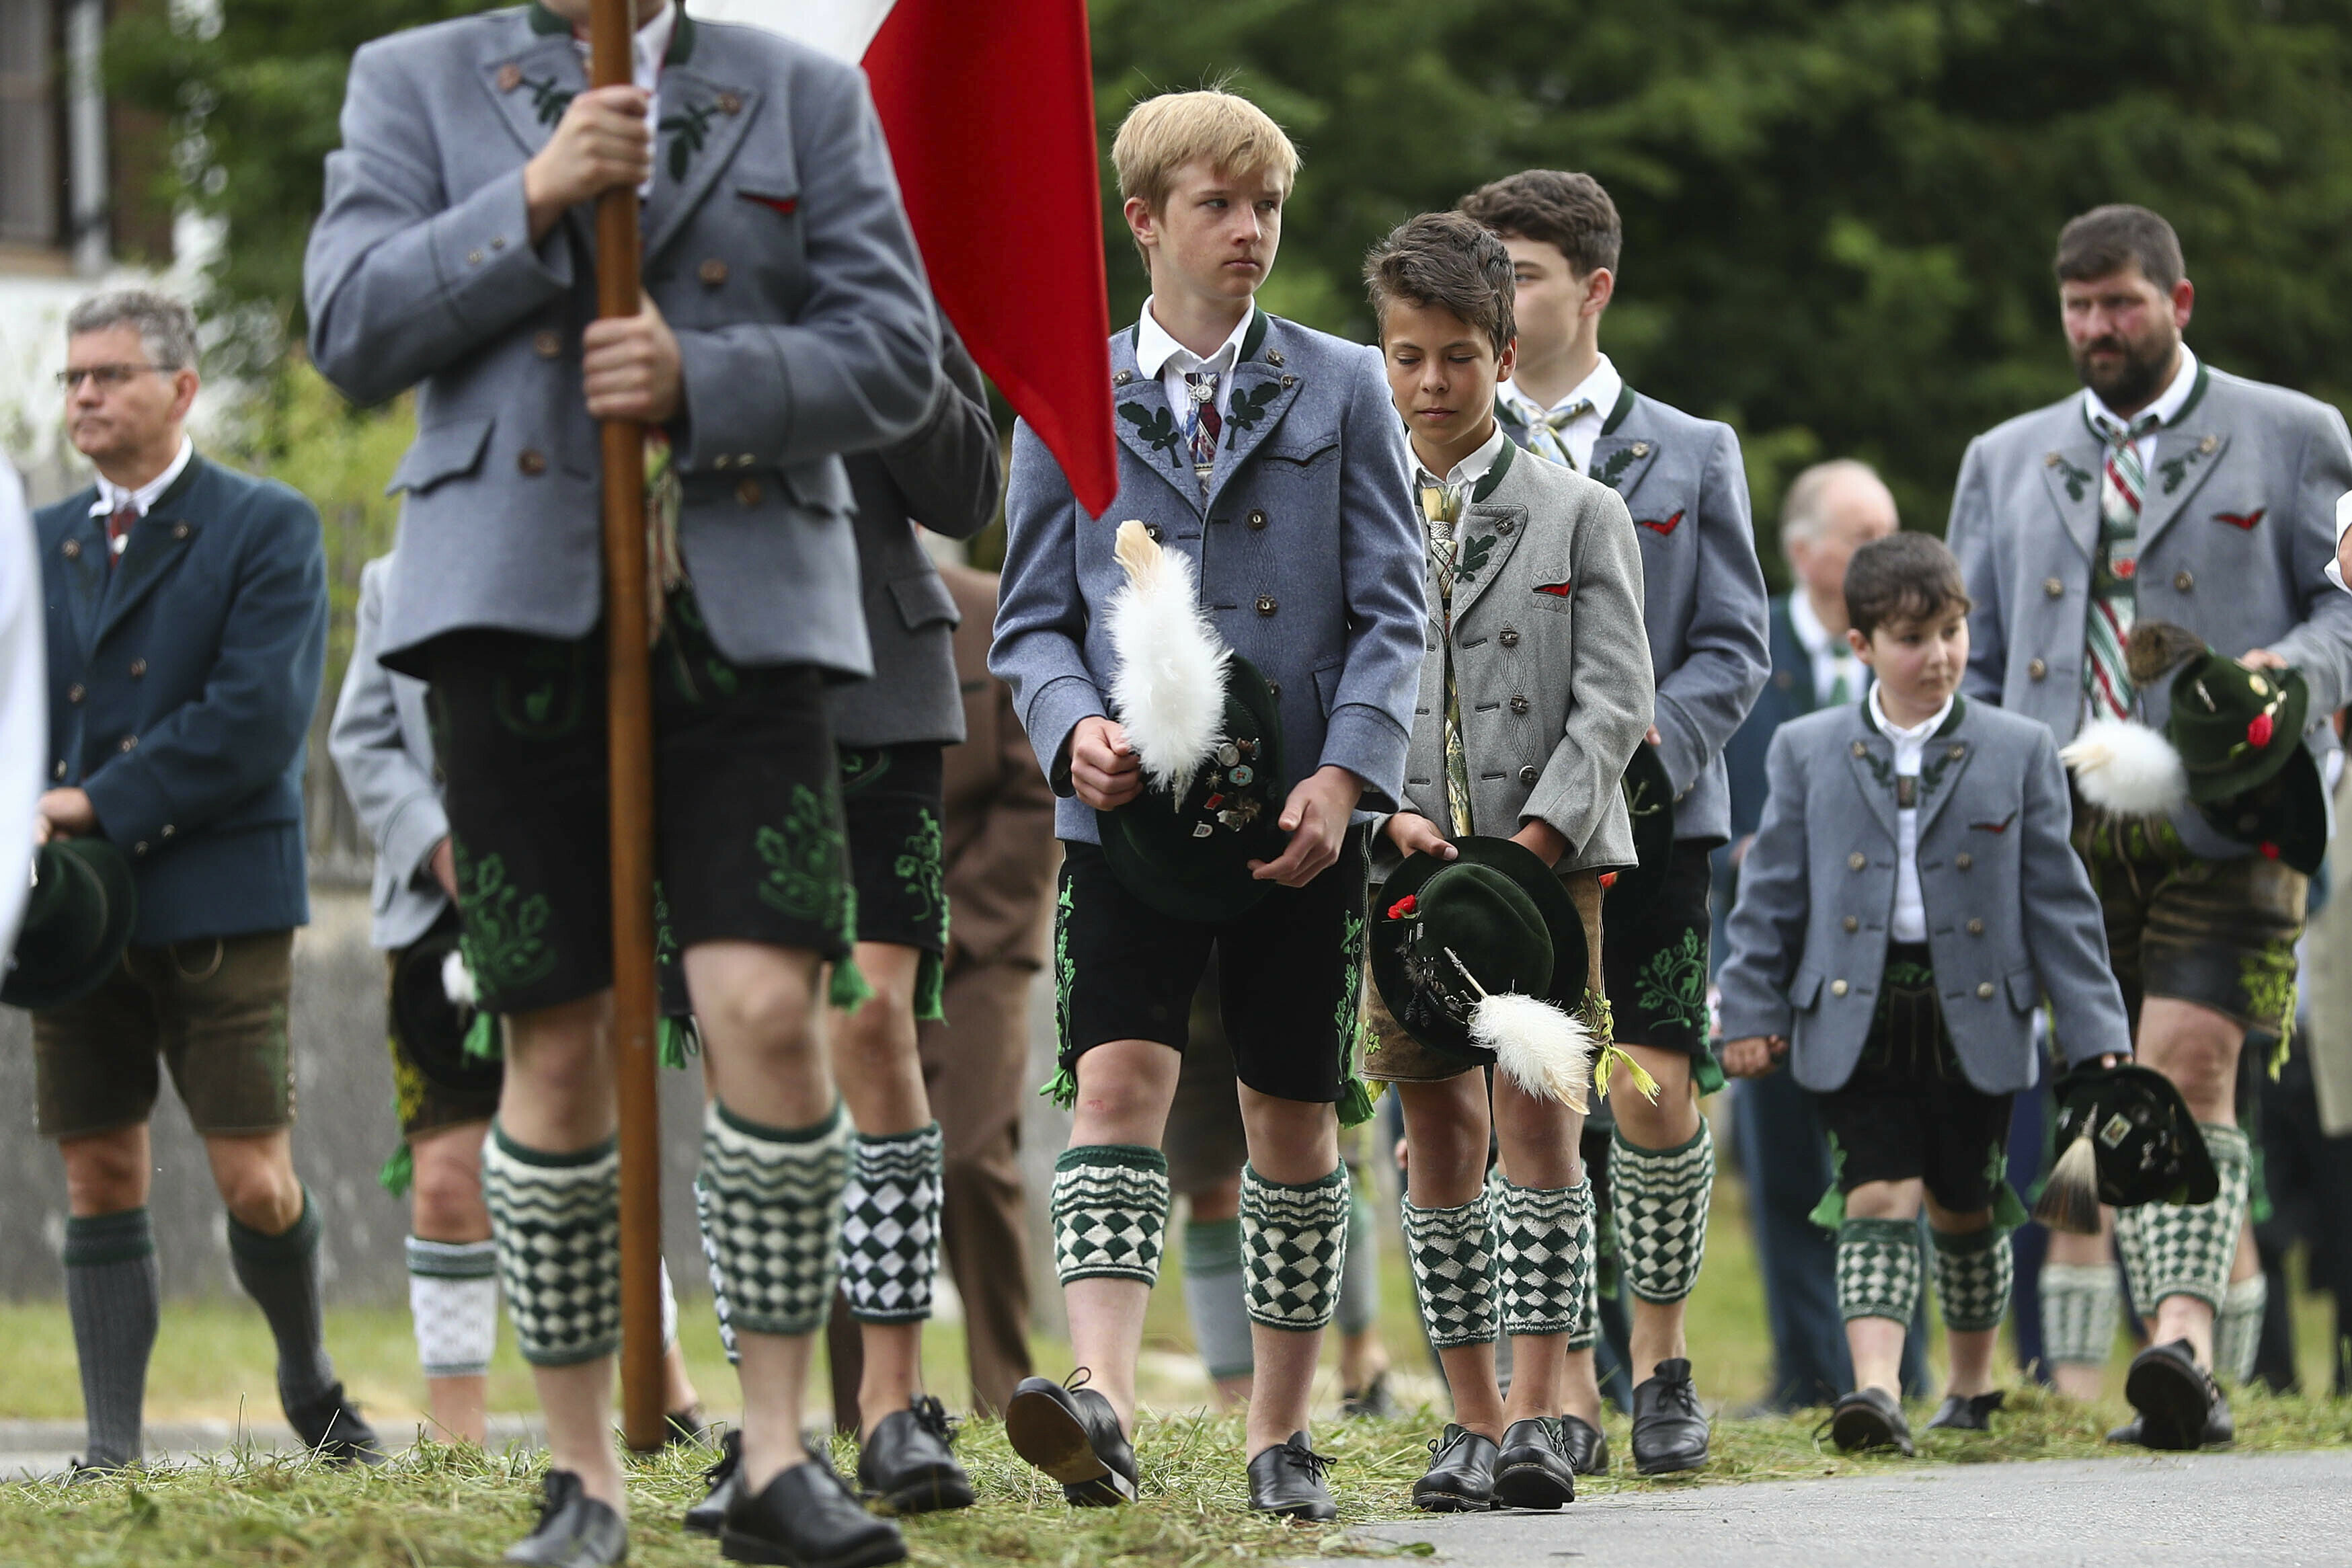 Young boys dressed in traditional clothes wait for the start of a Corpus Christi procession at lake Staffelsee in Seehausen near Murnau, Germany, Thursday, June 20, 2019. (AP Photo/Matthias Schrader)